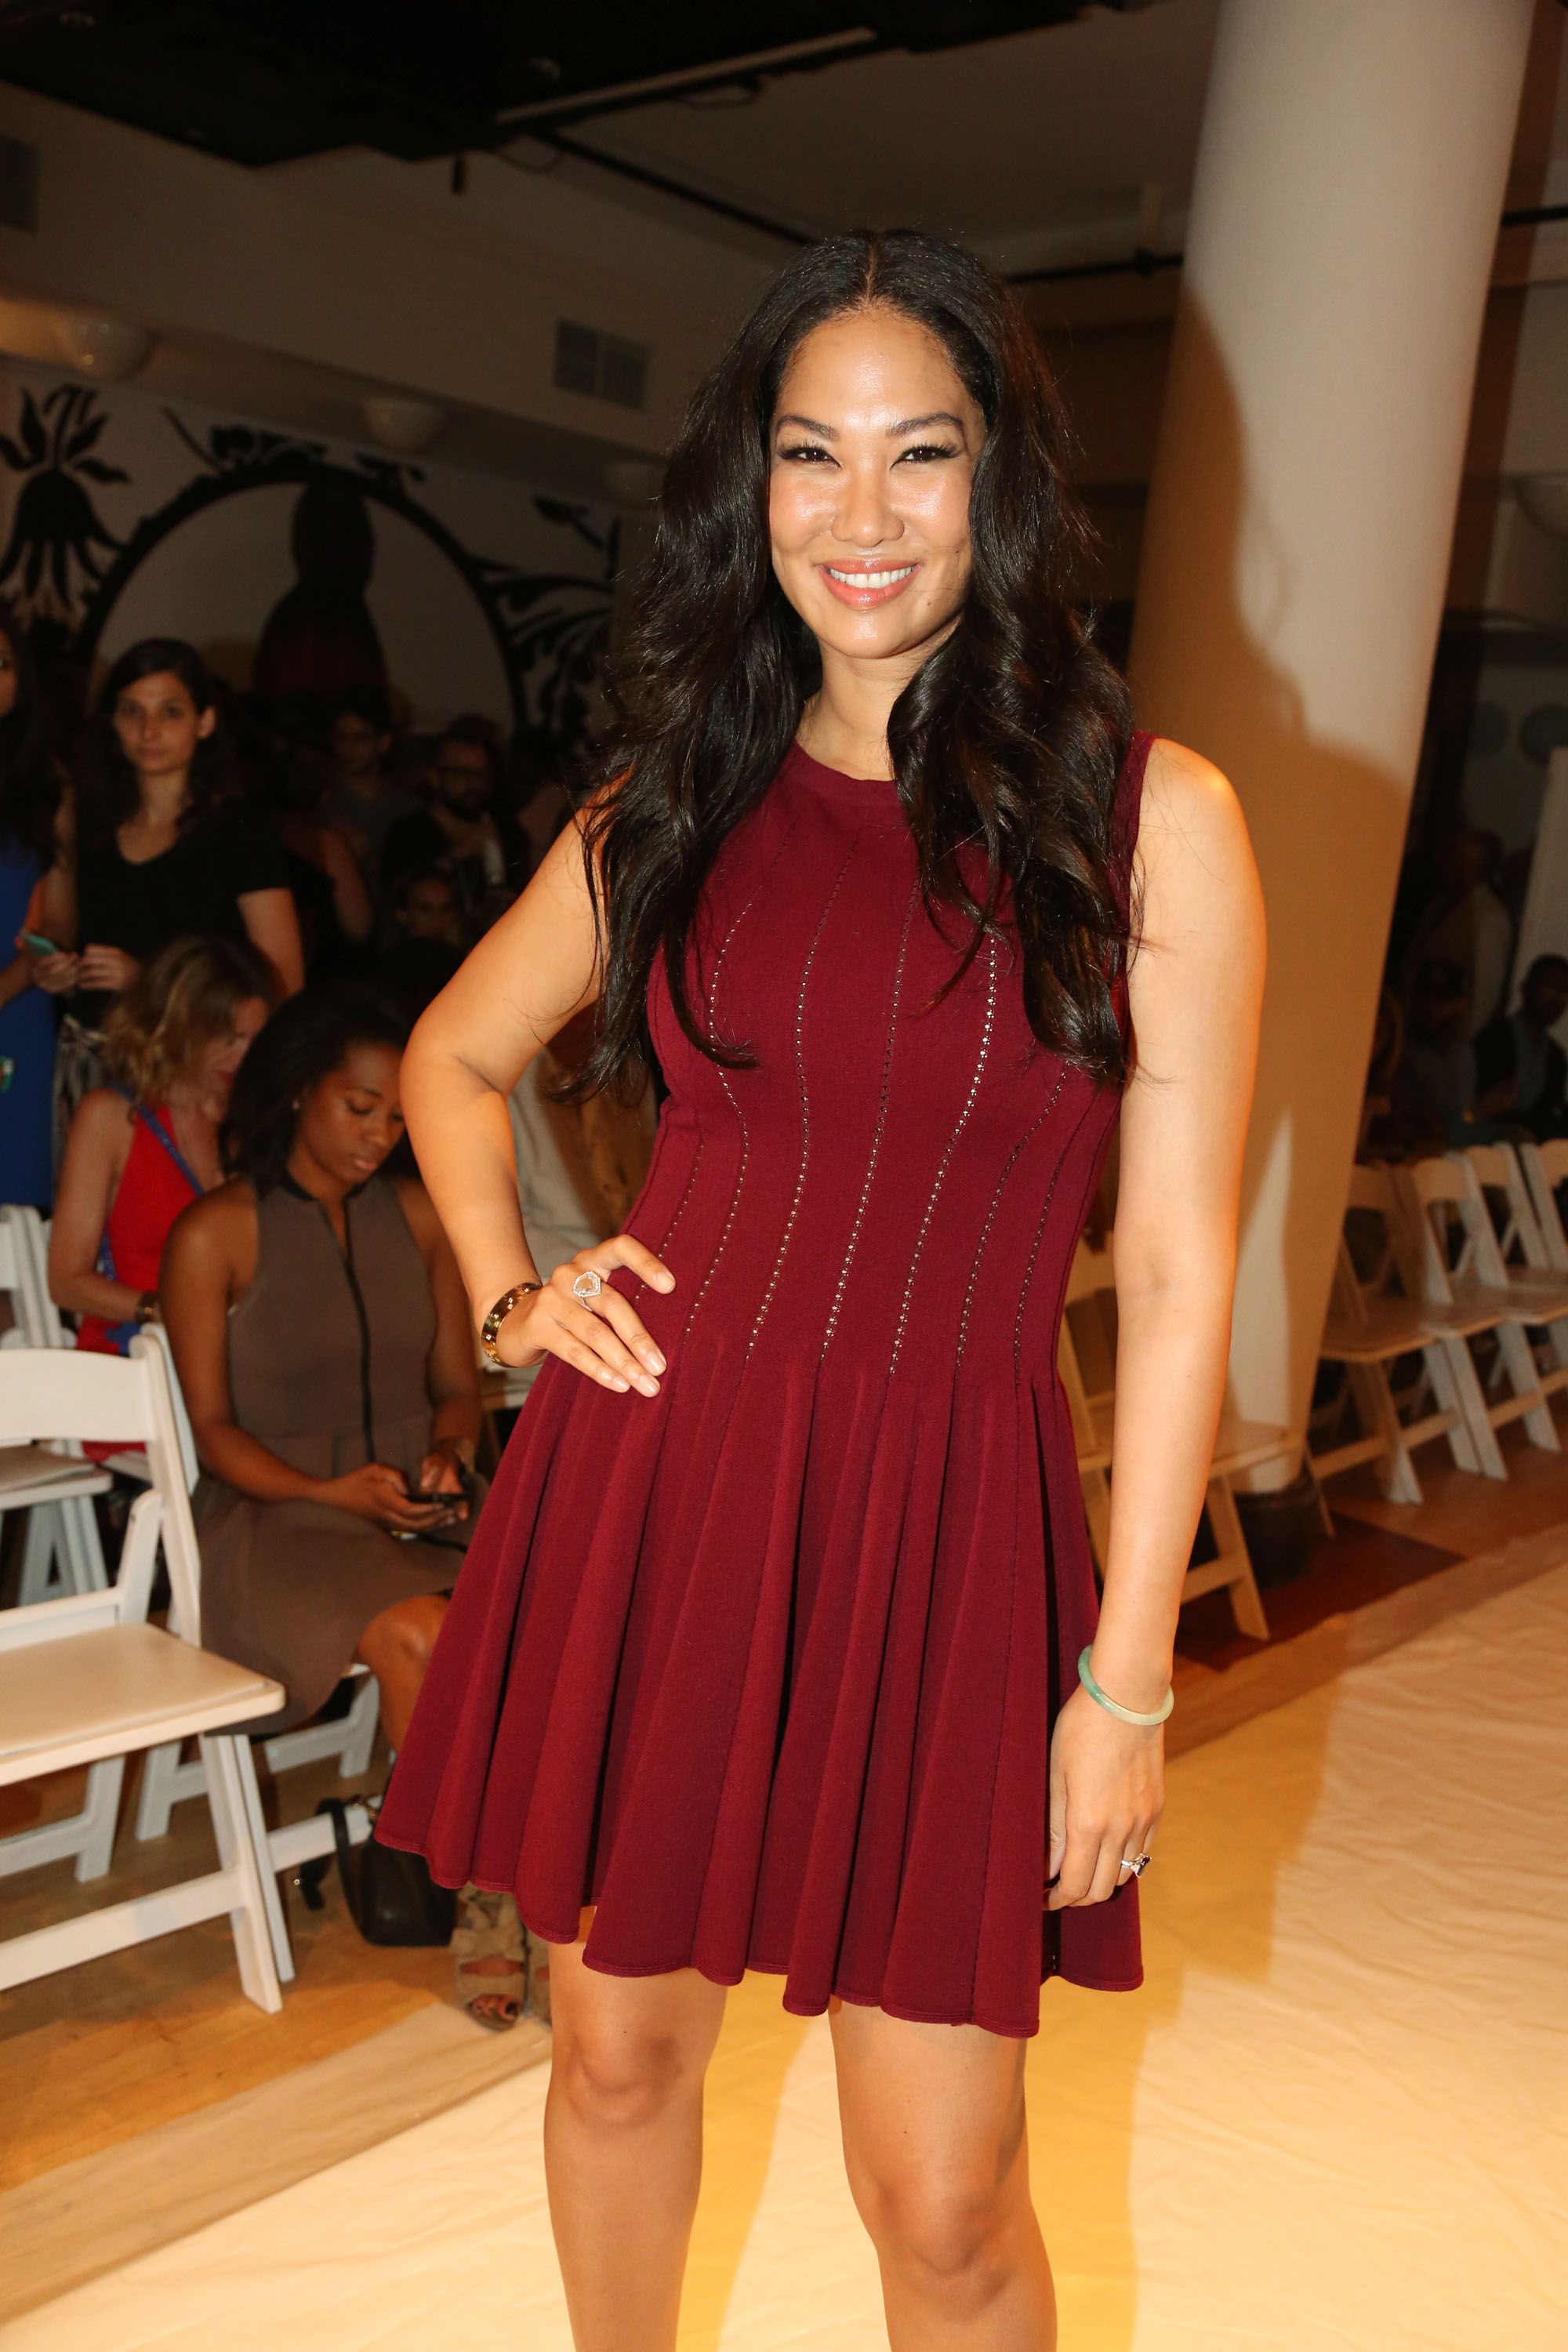 Kimora Lee Simmons attends Argyleculture By Russell Simmons on September 5, 2014 in New York. | Photo: Getty Images